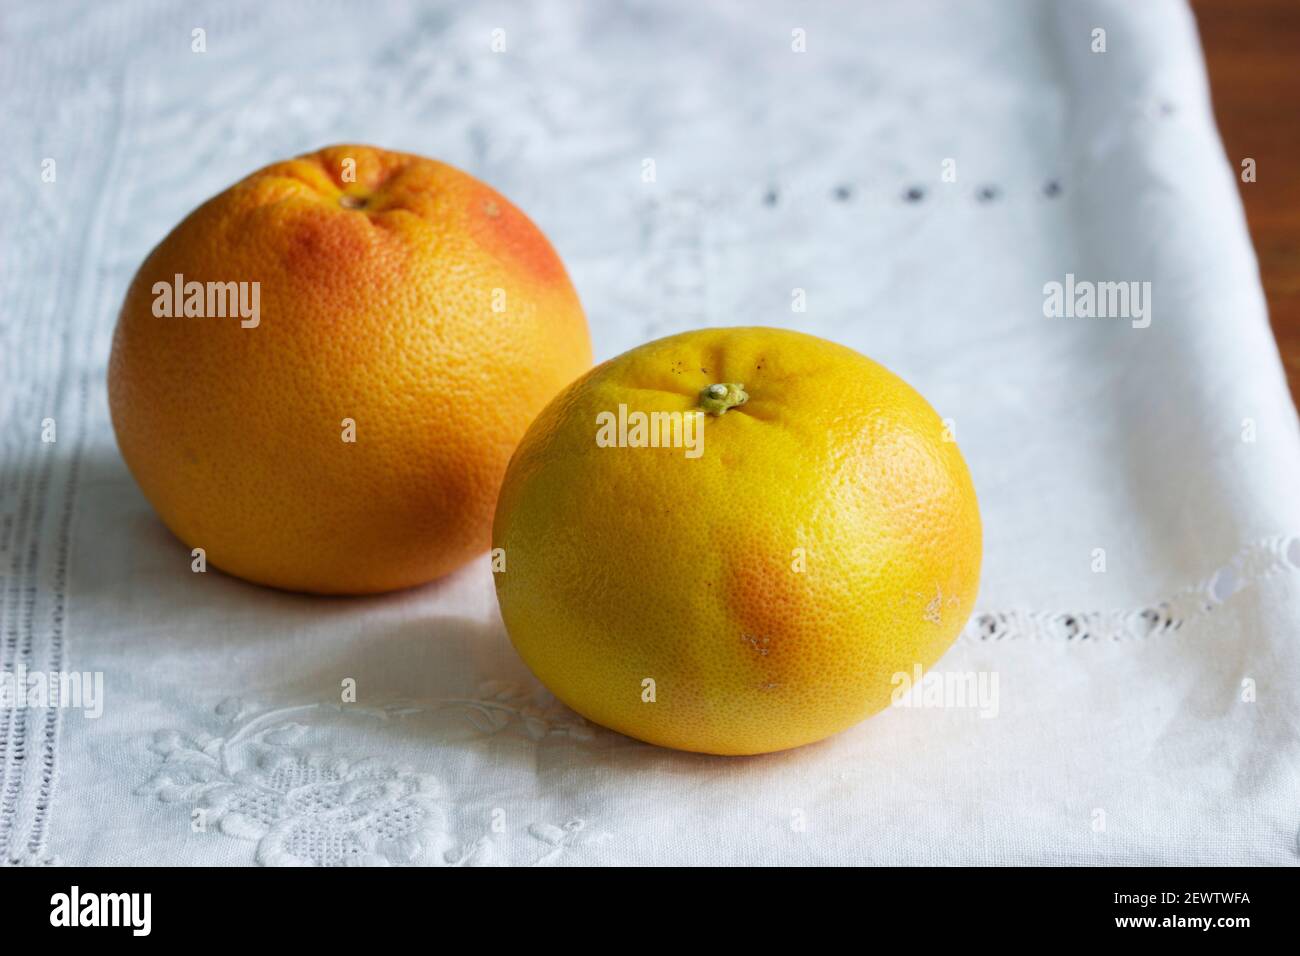 Ripe grapefruits on a white screwed tablecloth. Stock Photo